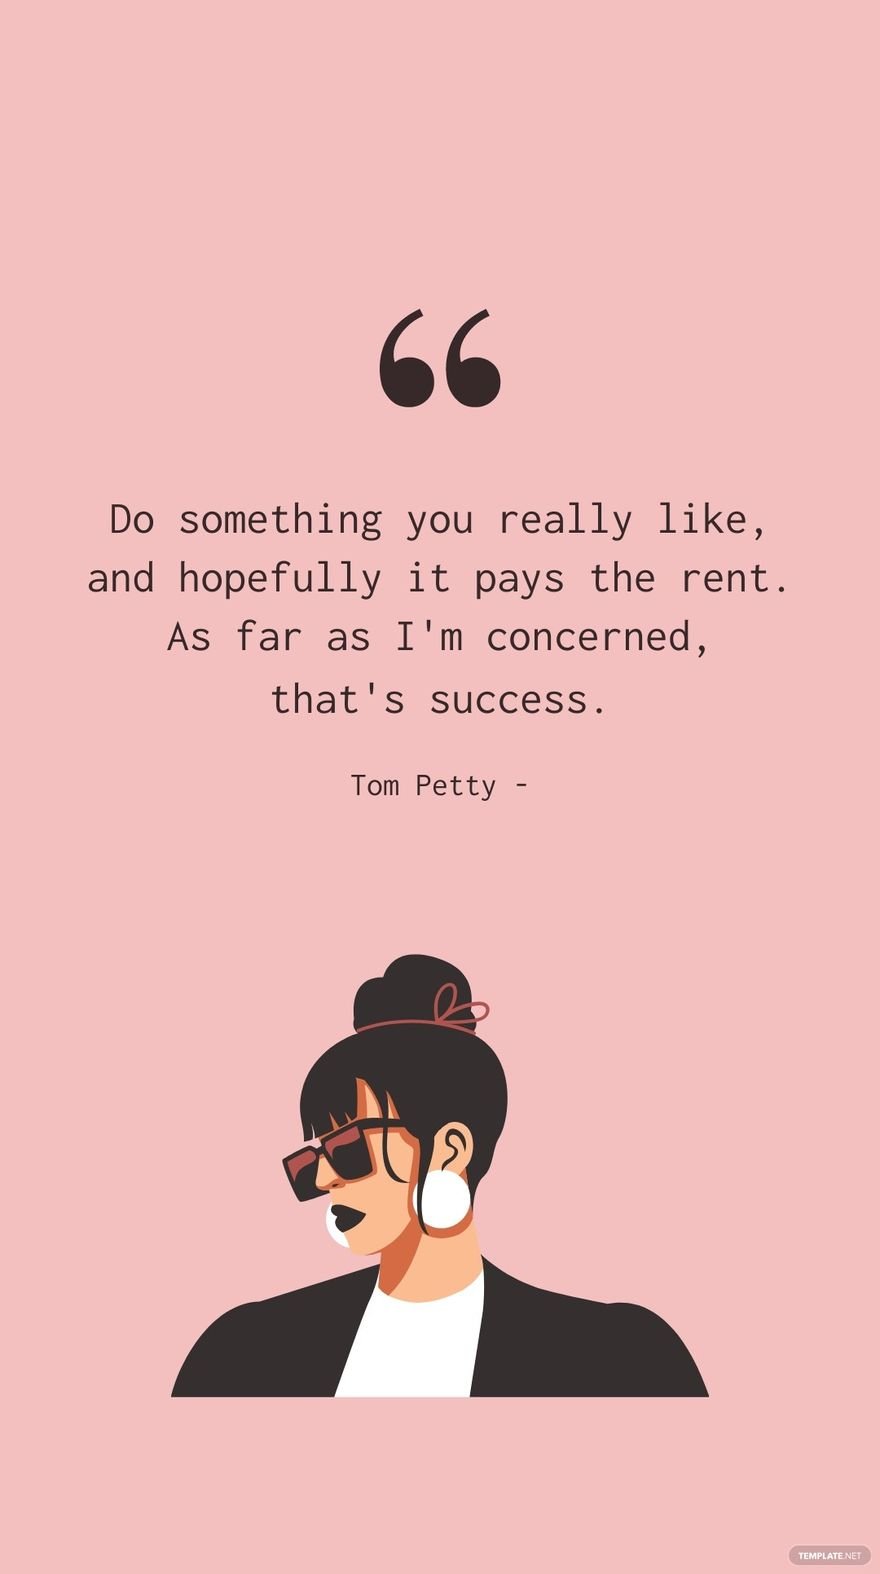 Tom Petty - Do something you really like, and hopefully it pays the rent. As far as I'm concerned, that's success.